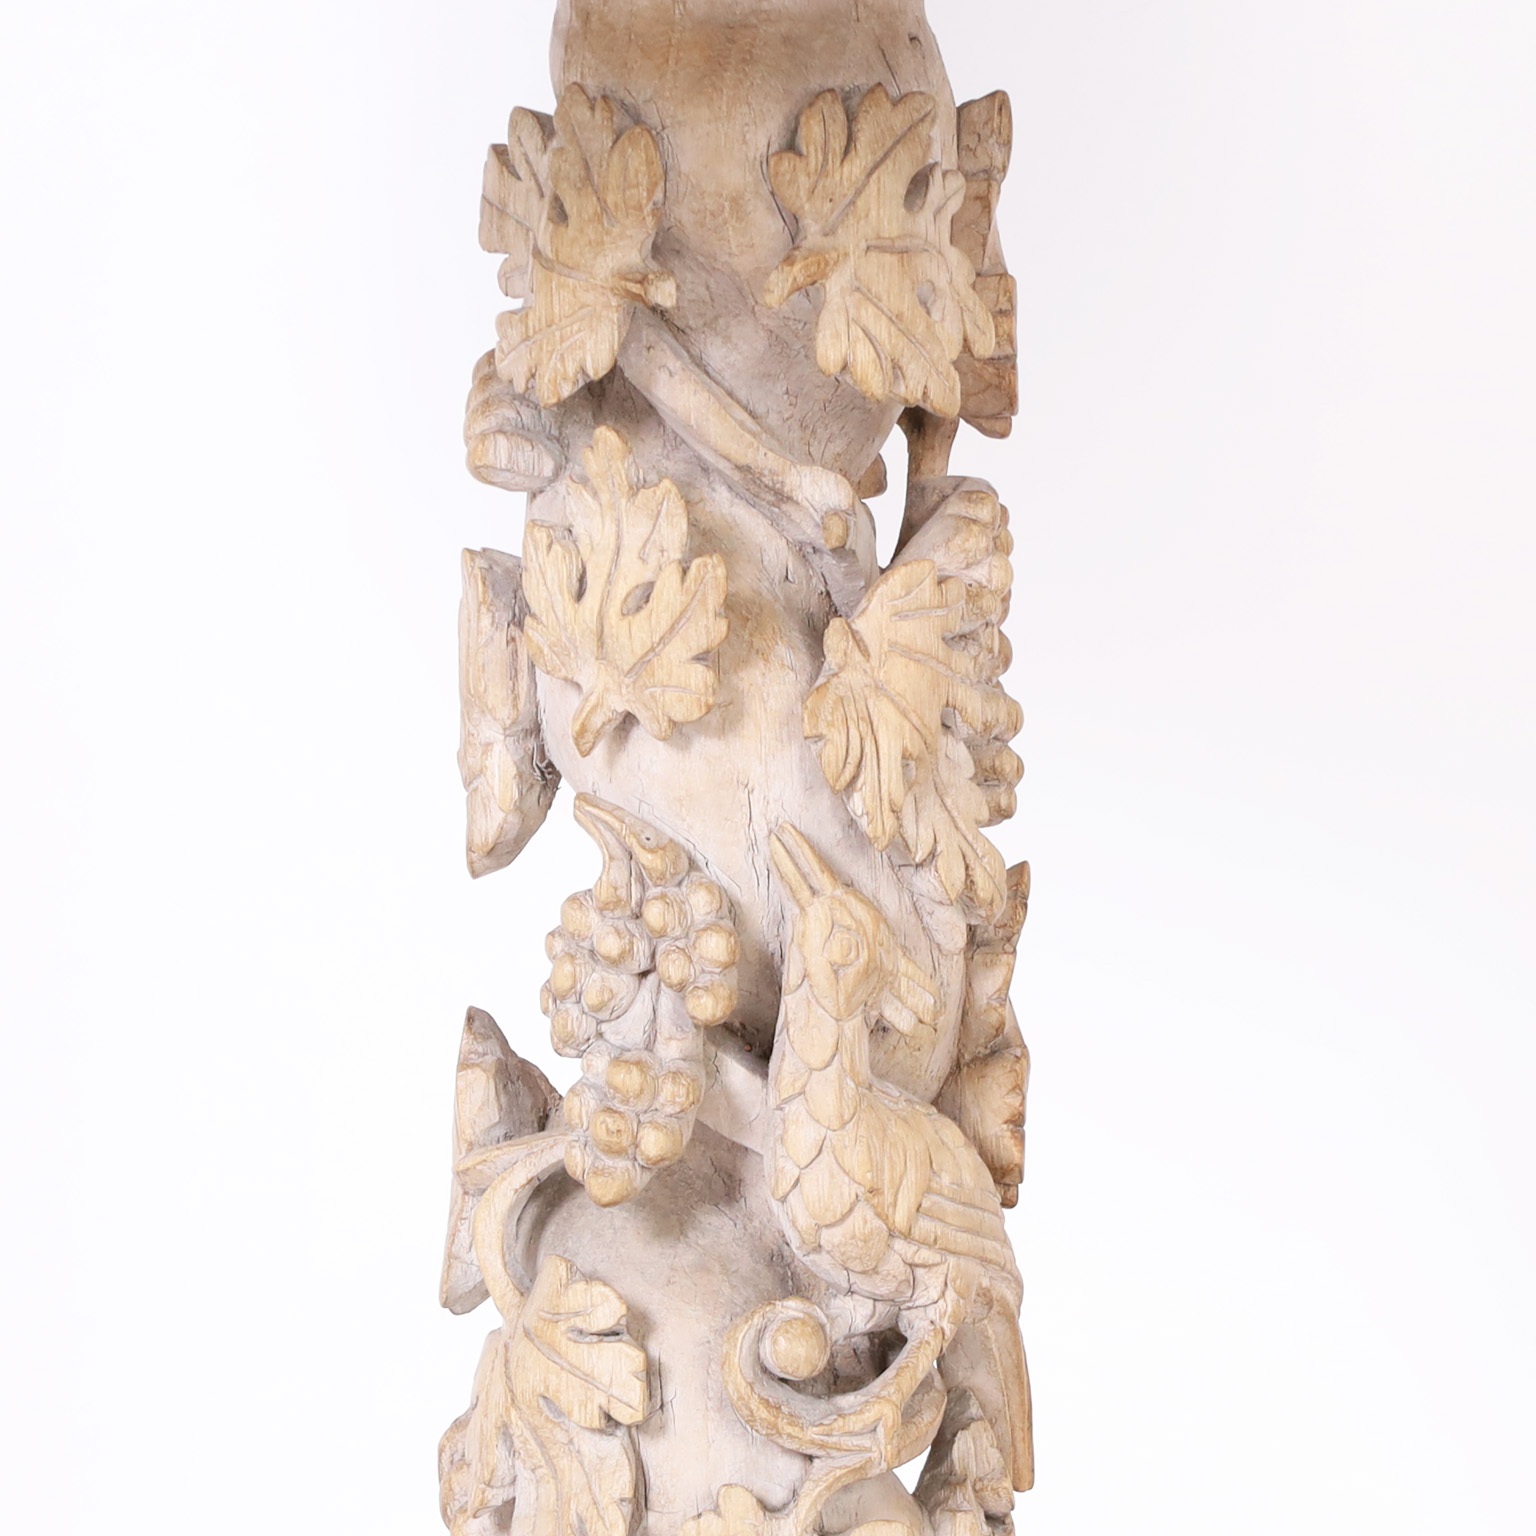 Pair of 18th C. Italian Carved Columns Converted to Table Lamps